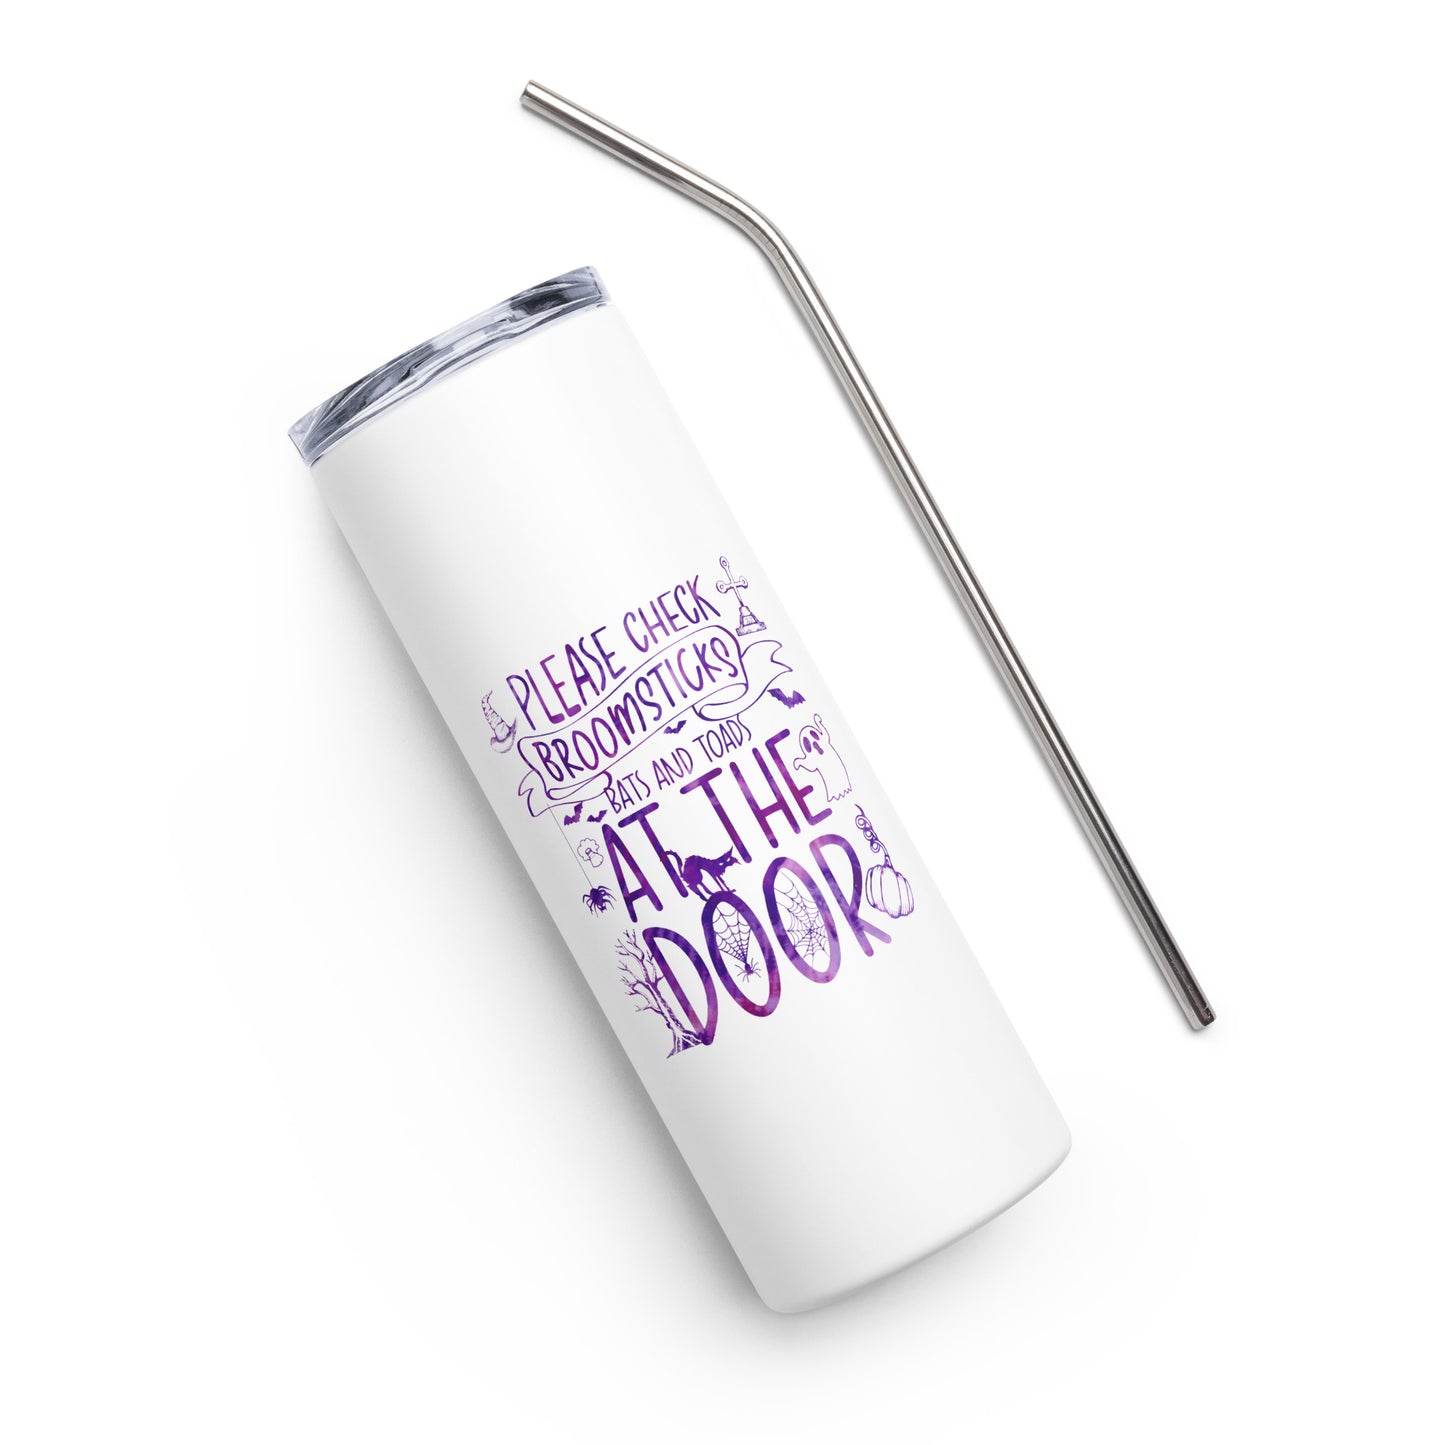 Please Check Your Broomsticks, Bats and Toads at the Door Stainless steel tumbler